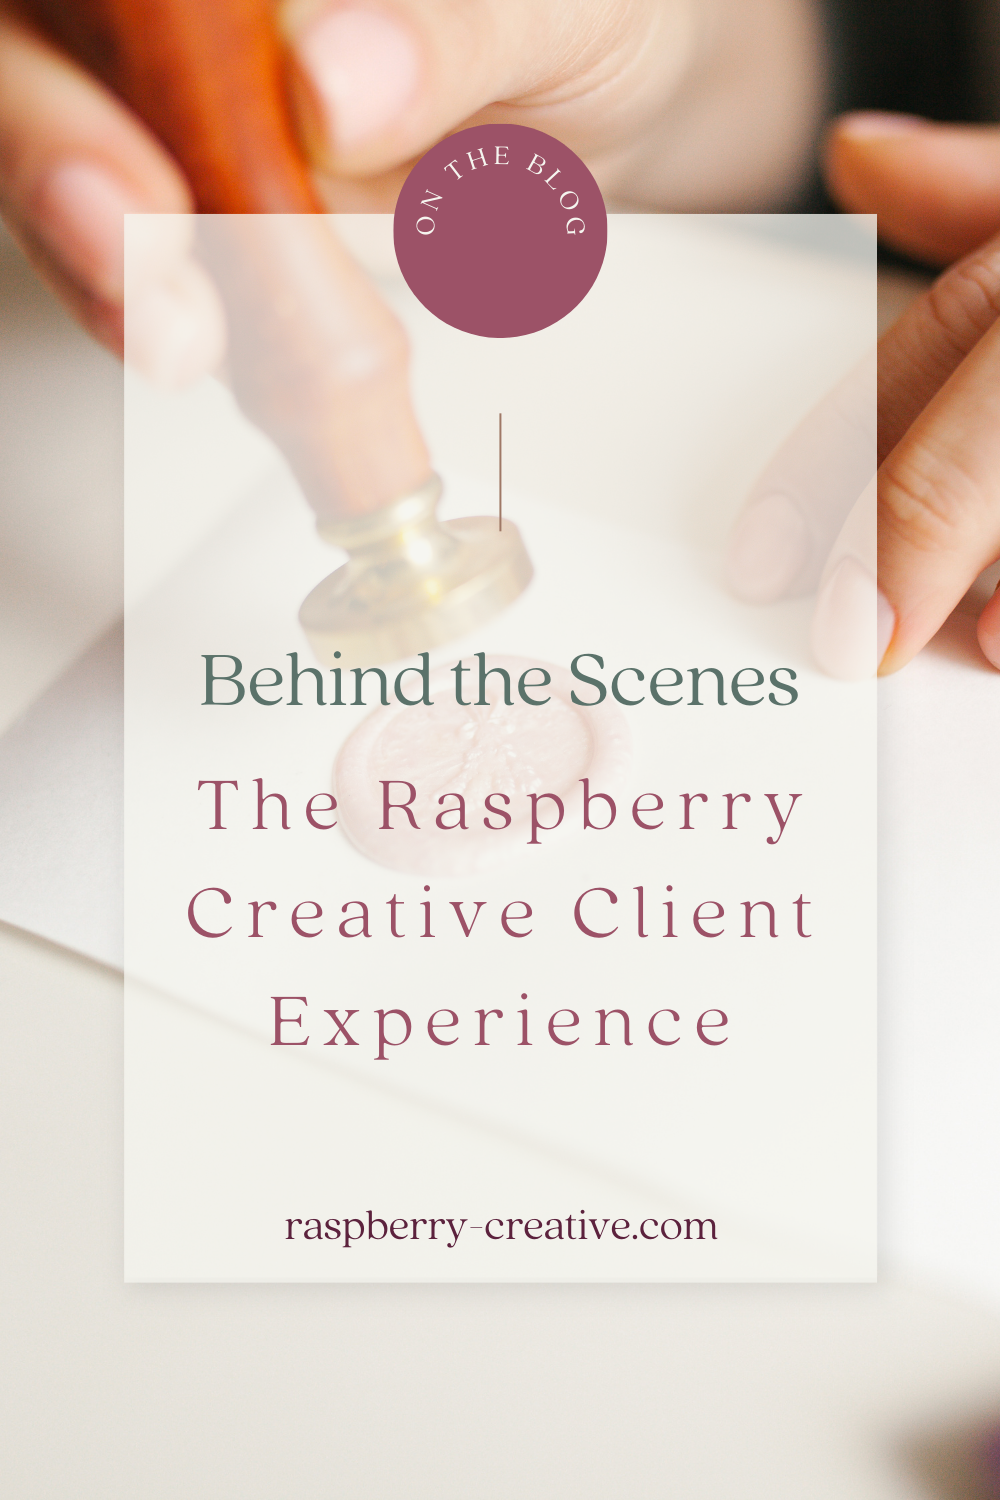 behind the scenes - the raspberry creative client experience